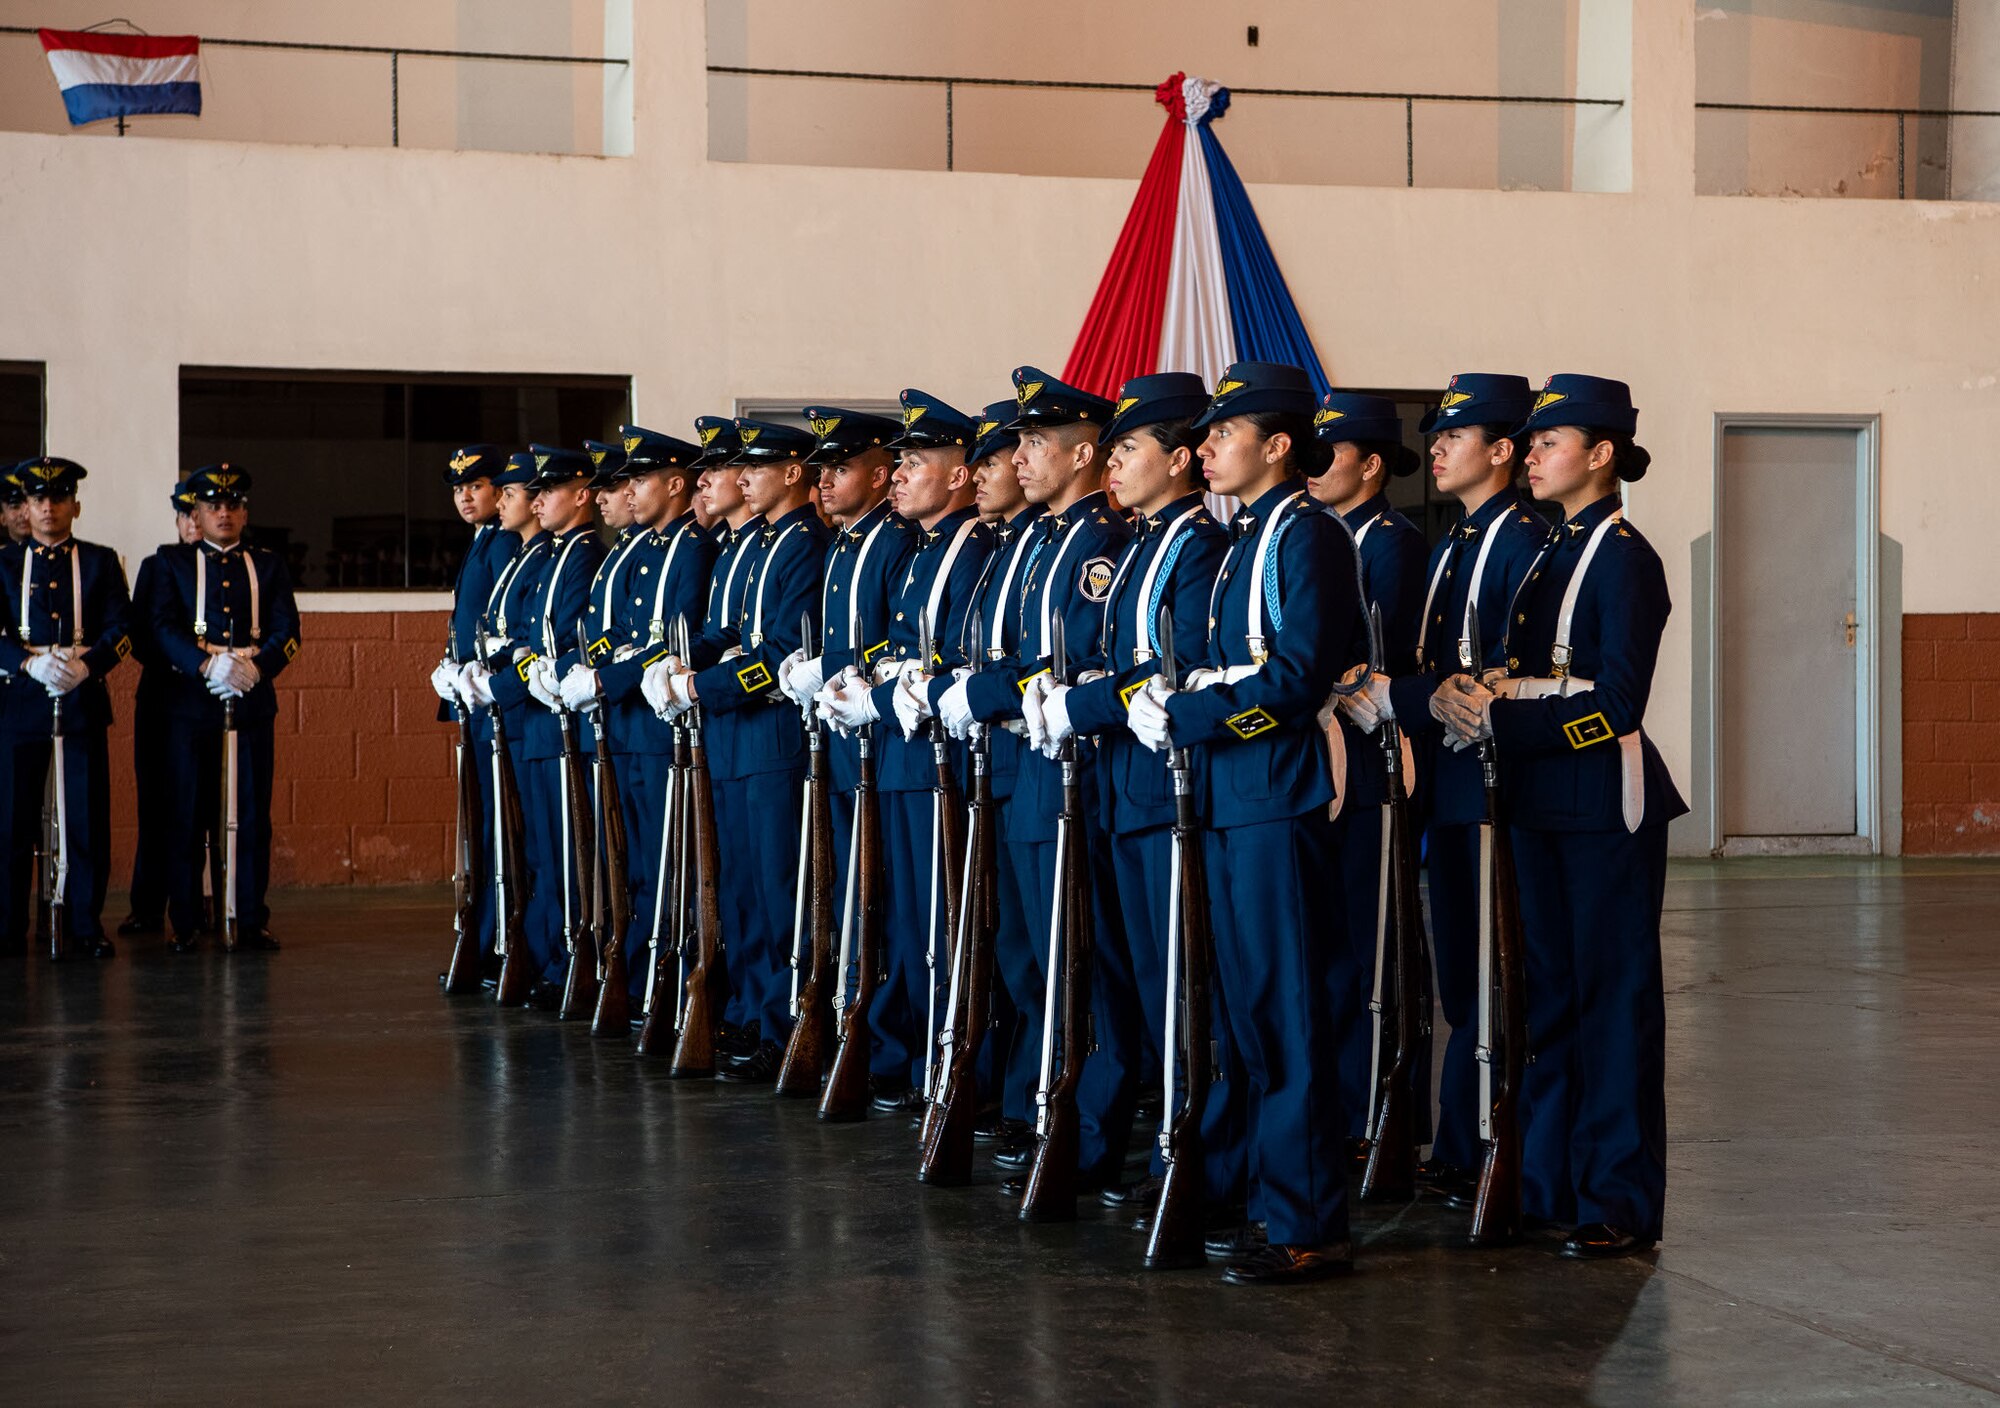 Drill team members are lined up and standing in formation